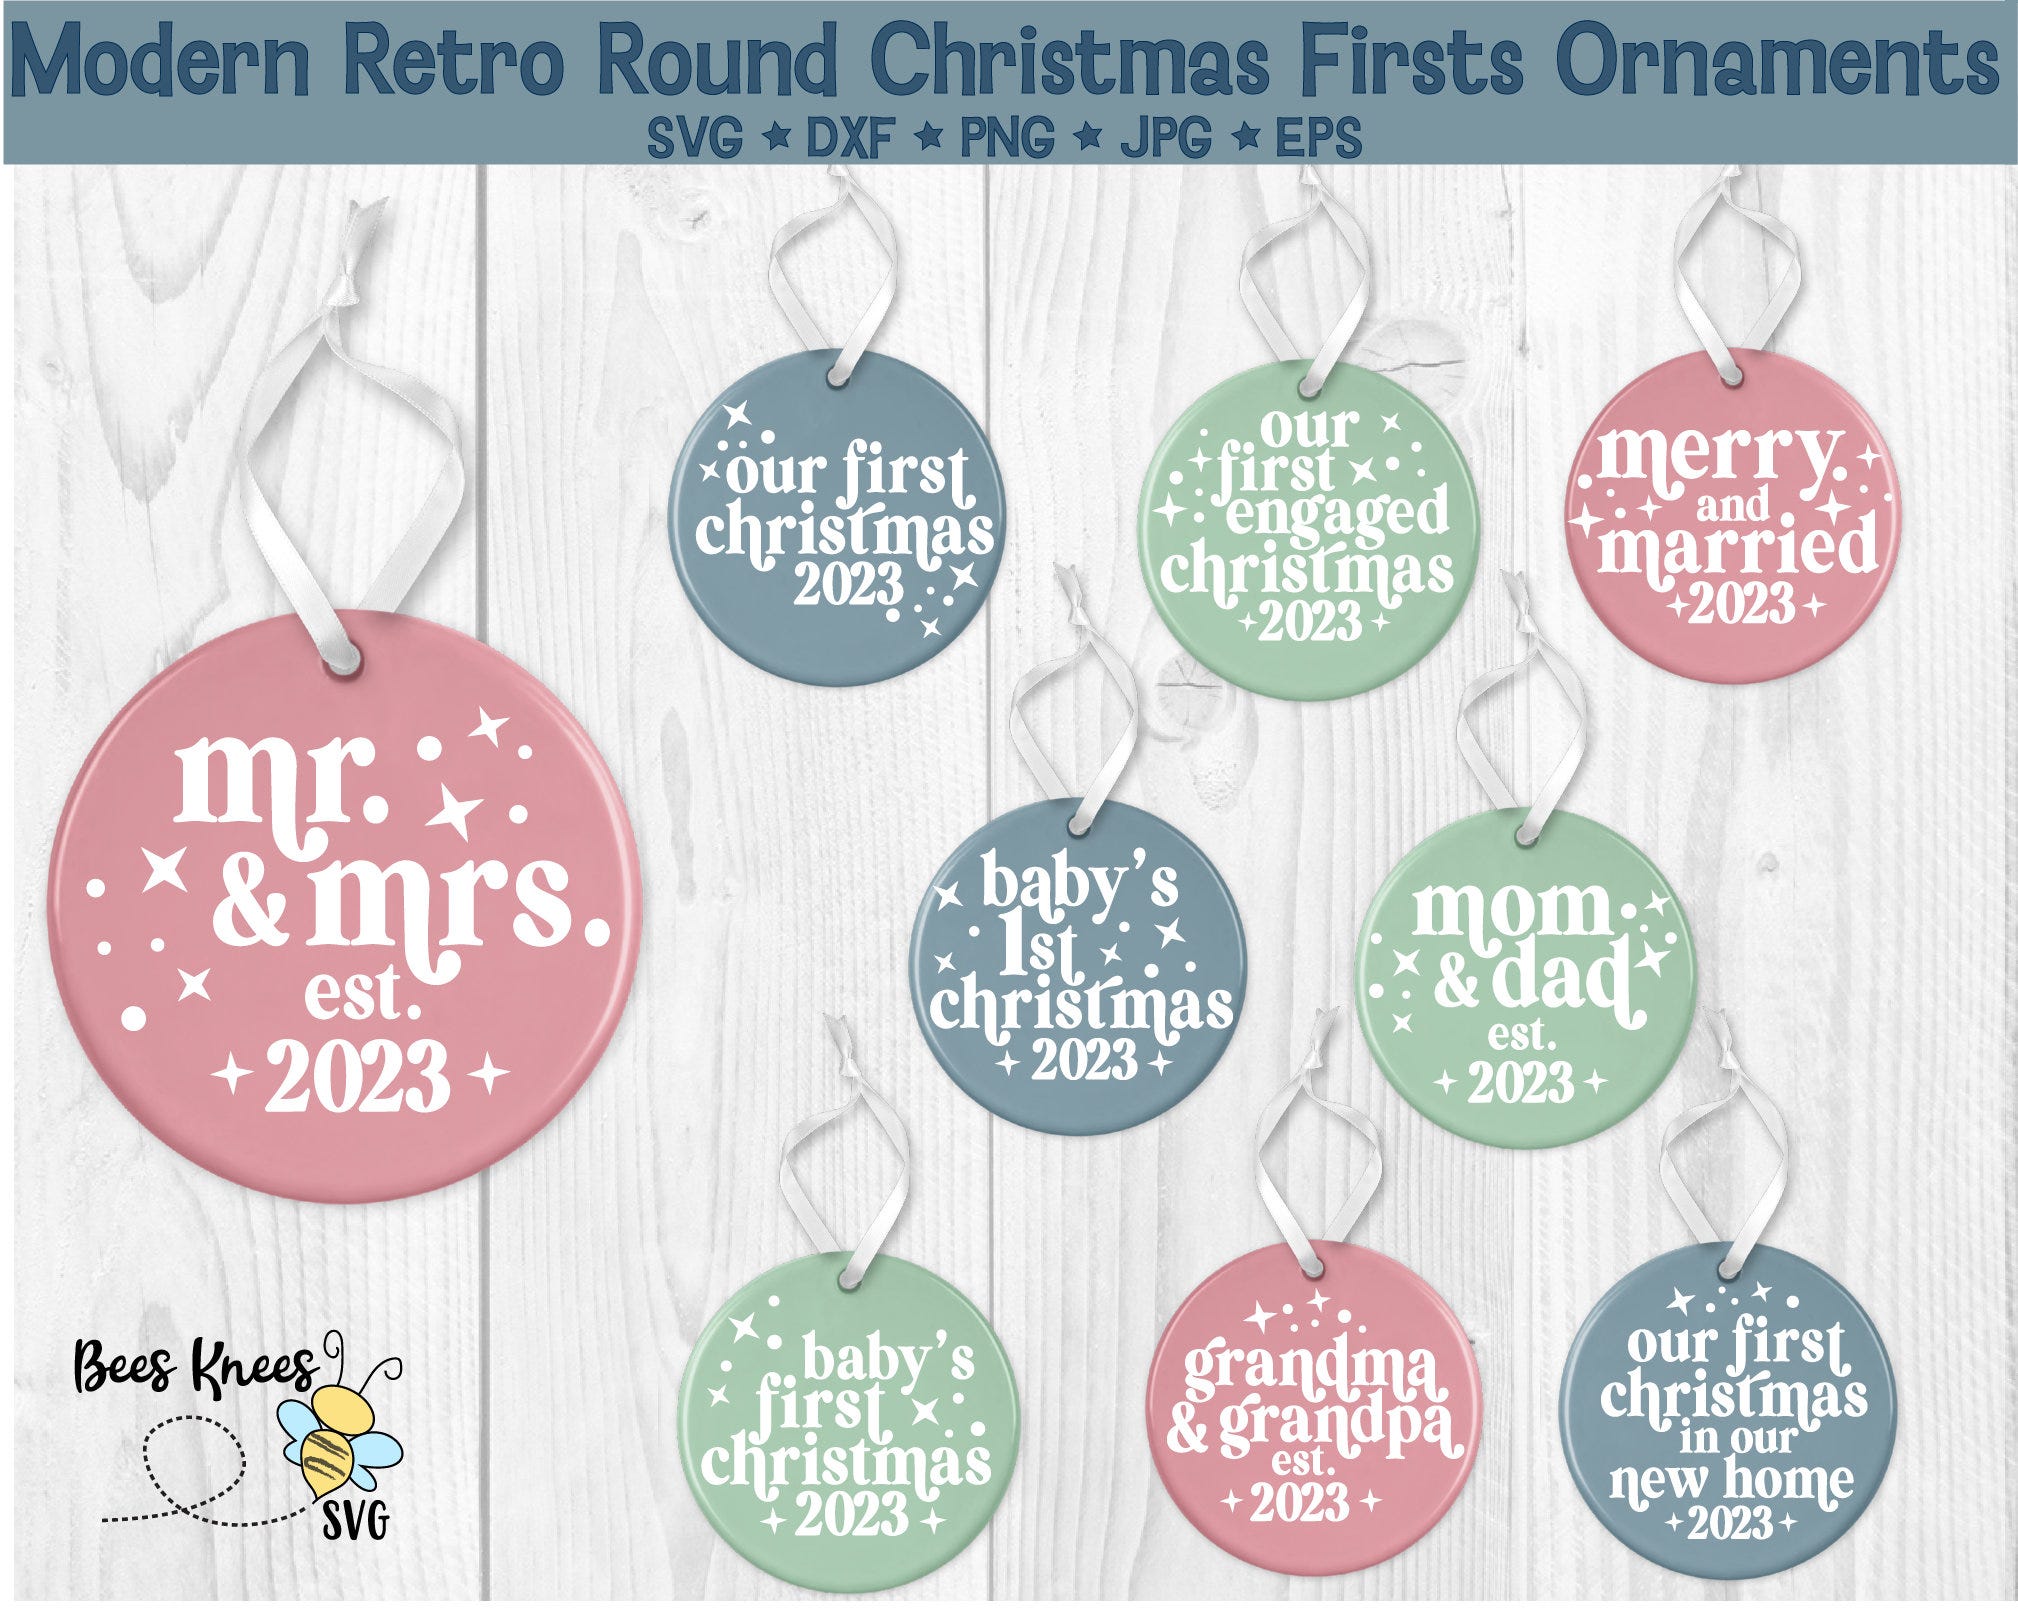 Round Christmas Firsts Ornament 2023 Bundle Svg, Modern Retro Christmas Ornament Svg, Baby